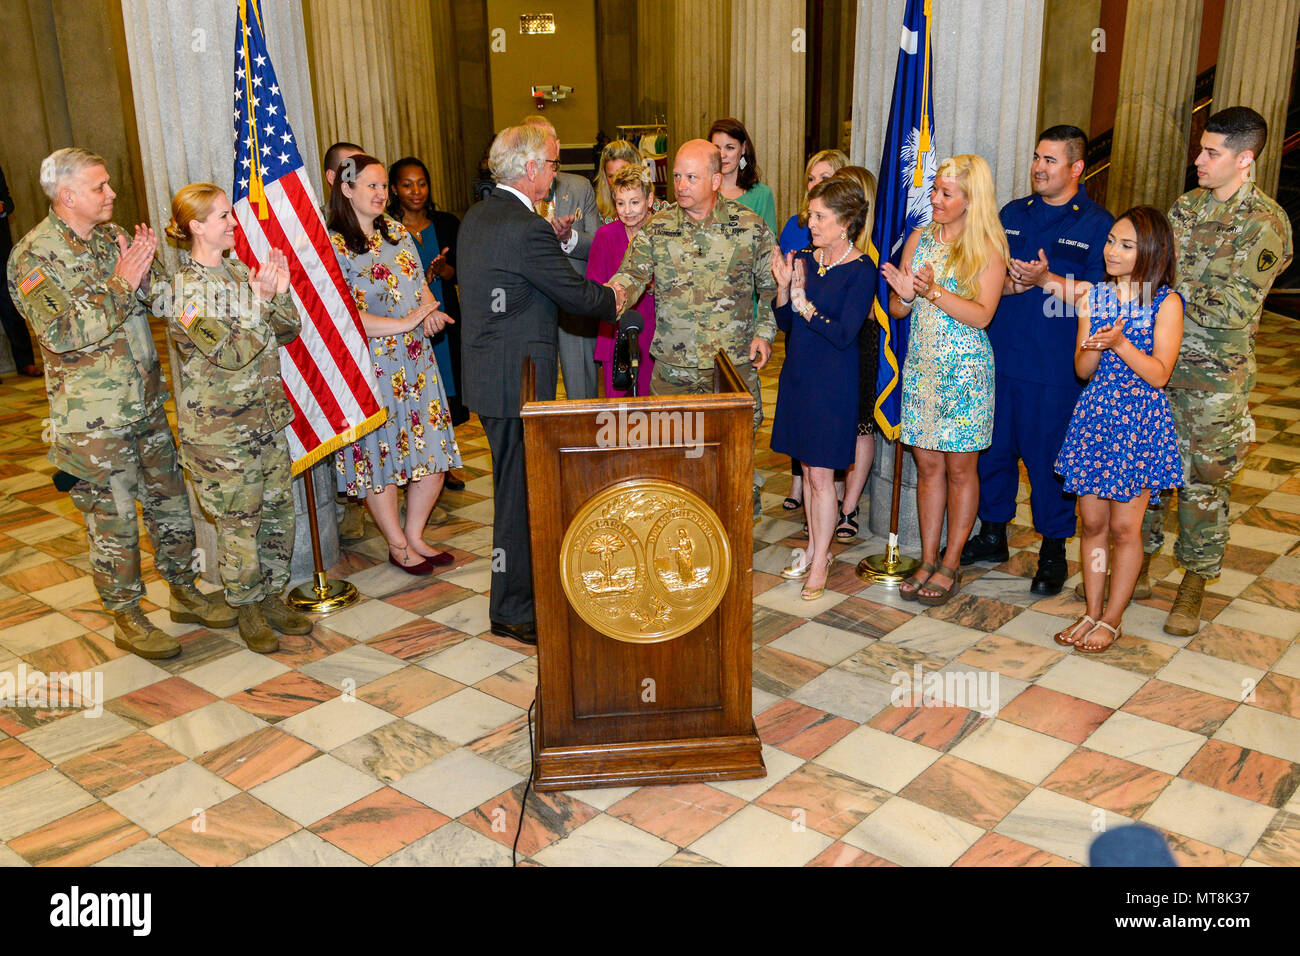 South Carolina Gov. Henry McMaster presents a Proclamation recognizing May as Military Spouse Appreciation month throughout South Carolina, joined by U.S. Army Maj. Gen. Robert E. Livingston, Jr. the adjutant general for South Carolina and his wife Barbara, Fort Jackson's Military Family of the Year, Staff Sgt. John Berta and his wife Agata, U.S. Coast Guard Petty Officer Jerry Stevens and his wife Sarah, and other military members with the spouses from the South Carolina Army and Air National Guard.  Receiving special recognition were four spouses of South Carolina Army National Guard Soldier Stock Photo